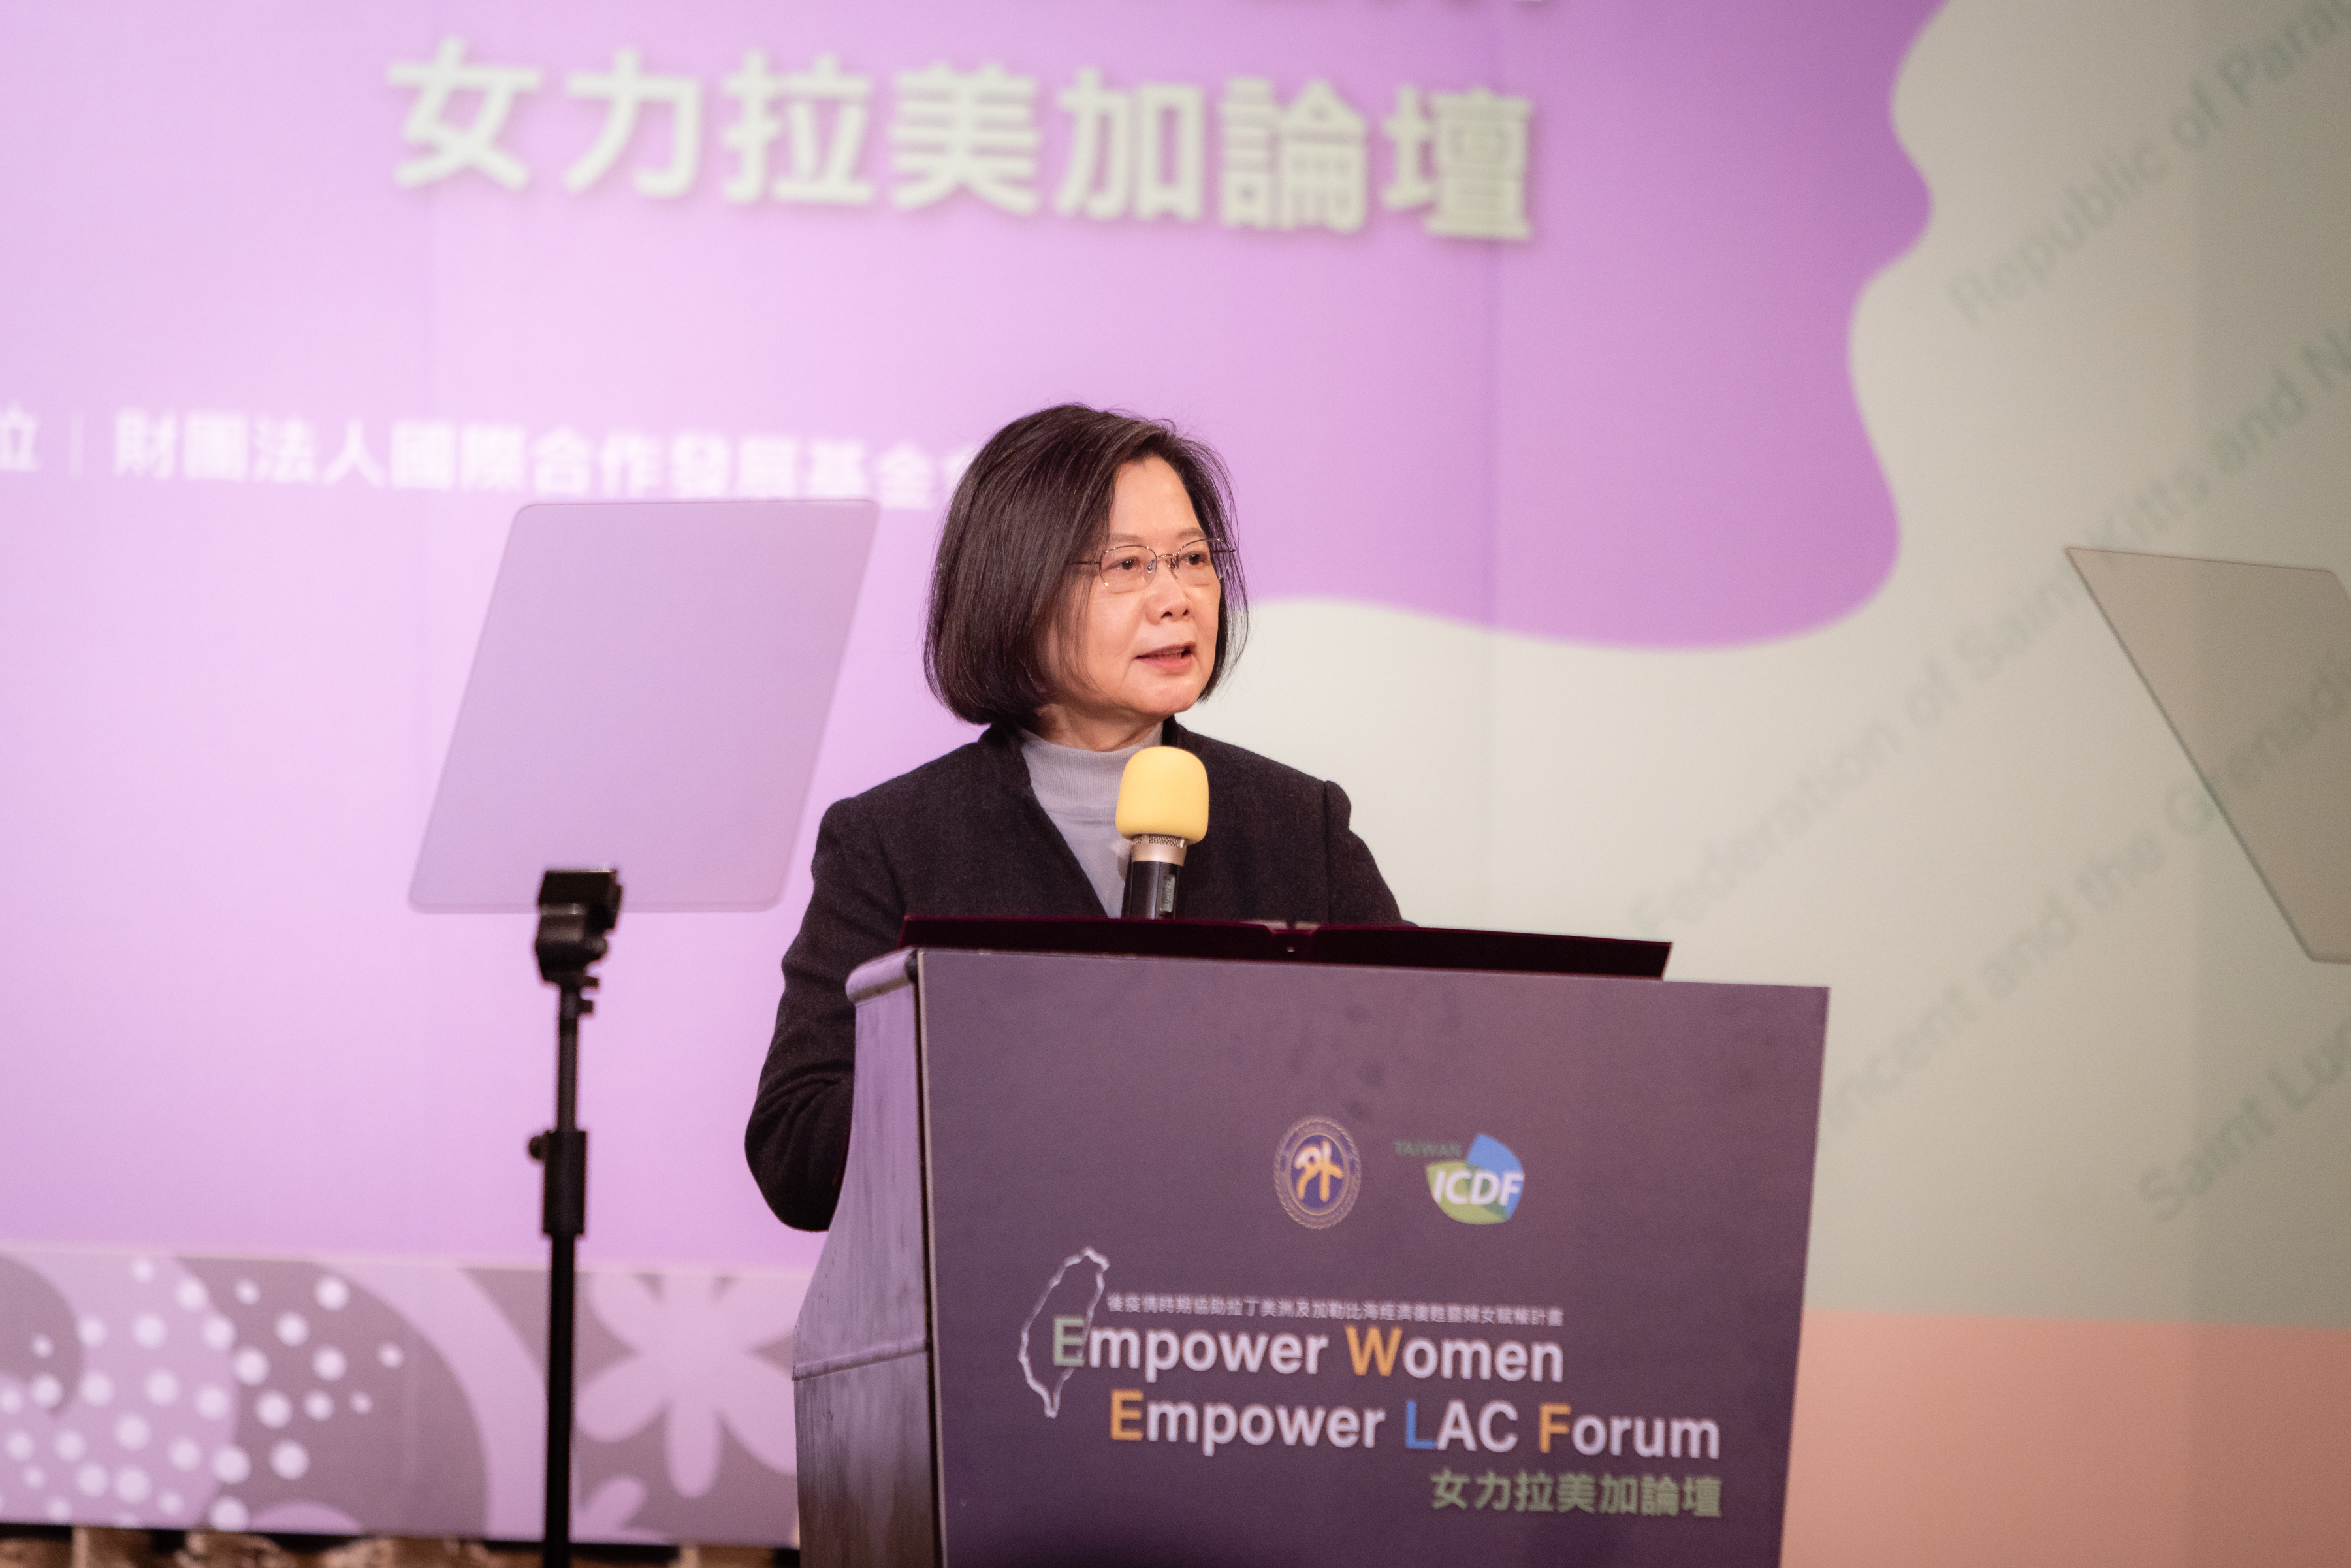 Empower Women! Empower LAC Forum! President Tsai Ing-wen and President Mario Abdo Benítez of Paraguay witnessed the outcome of Taiwan’s foreign assistance in women empowerment